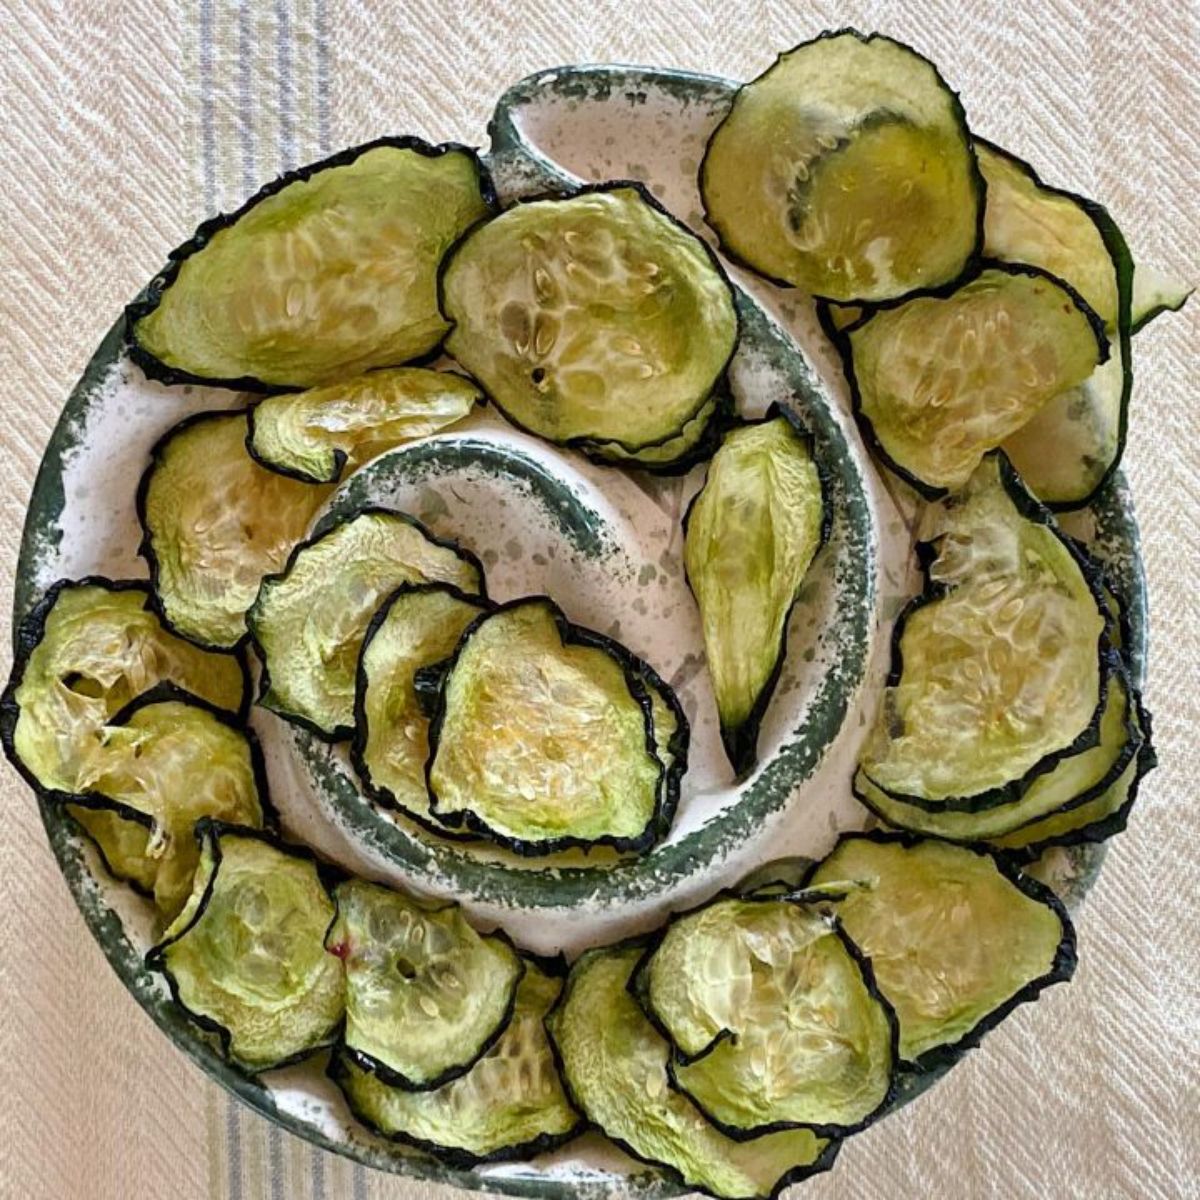 Salt and vinegar cucumber chips on a cool-looking tray.